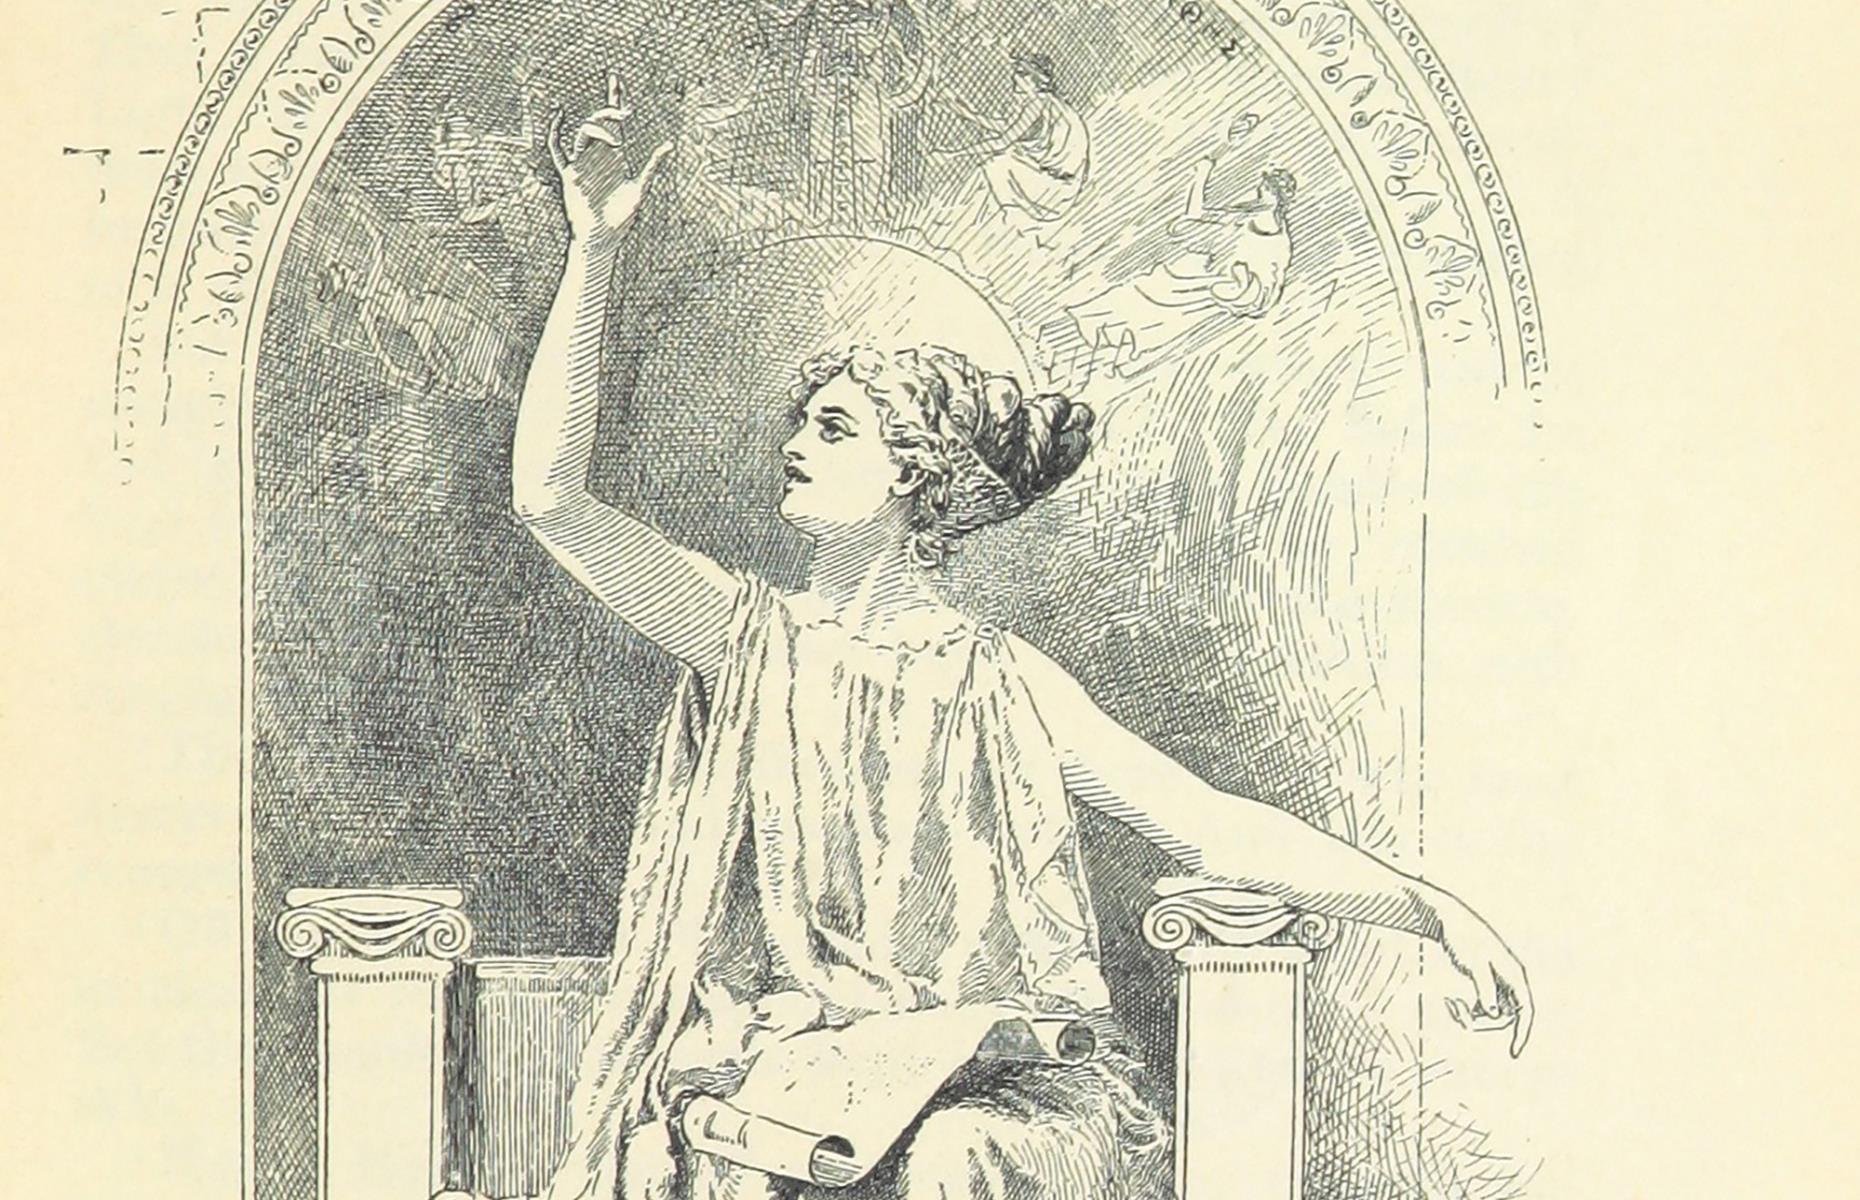 Hypatia was a Greek mathematician, philosopher, and astronomer born in Egypt, then part of the Byzantine empire. She’s credited with inventing the astrolabe – a brass instrument used to establish latitude and time. An important aid for early explorers, the astrolabe uses corresponding positions of the sun and stars to determine time and geography.